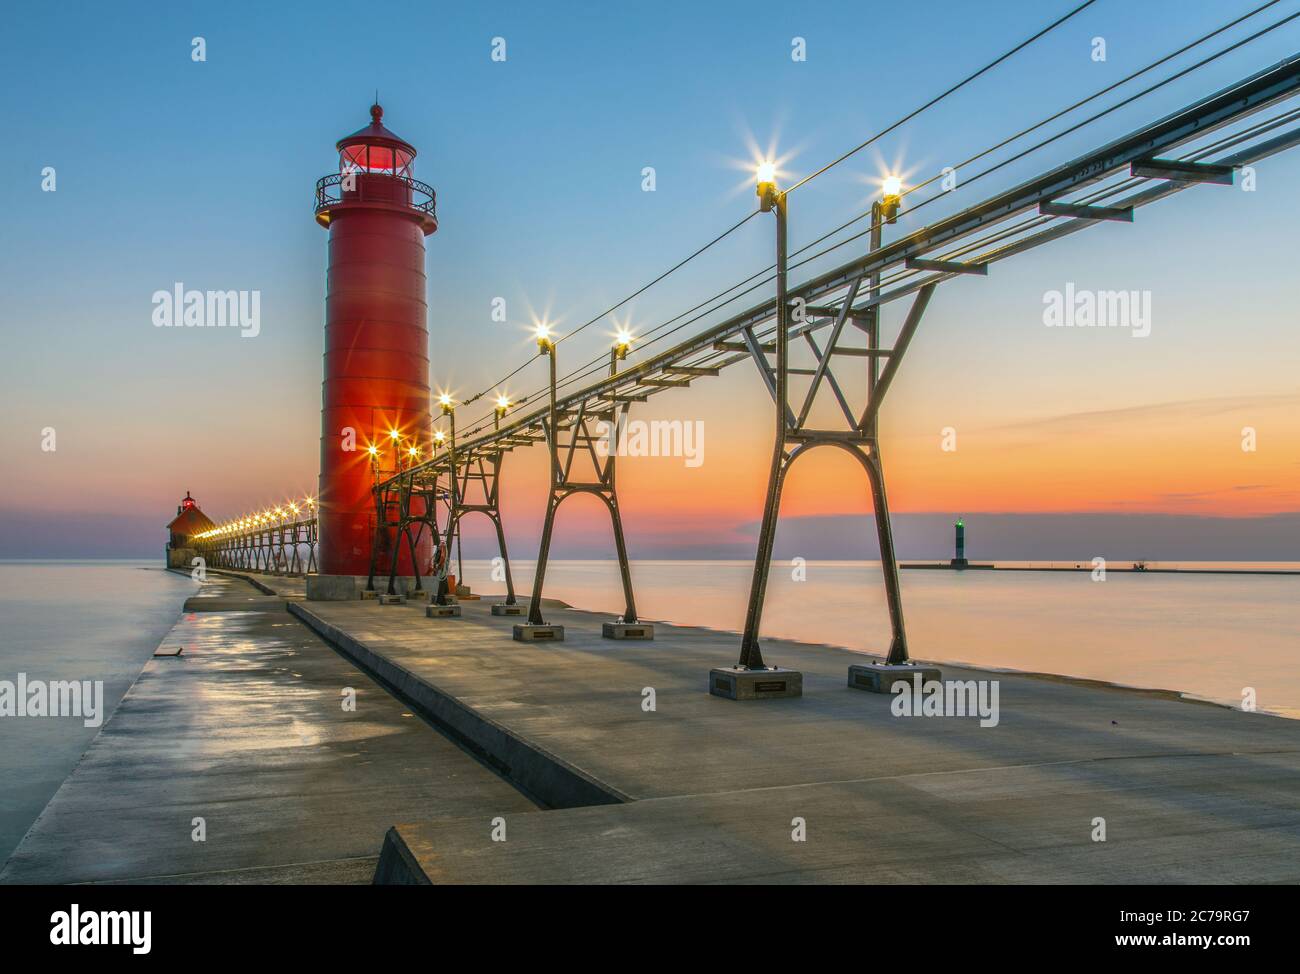 Grand Haven South Pier Lighthouse at sunset, with views of the Grand River and Lake Michigan; Grand Haven, Michigan Stock Photo